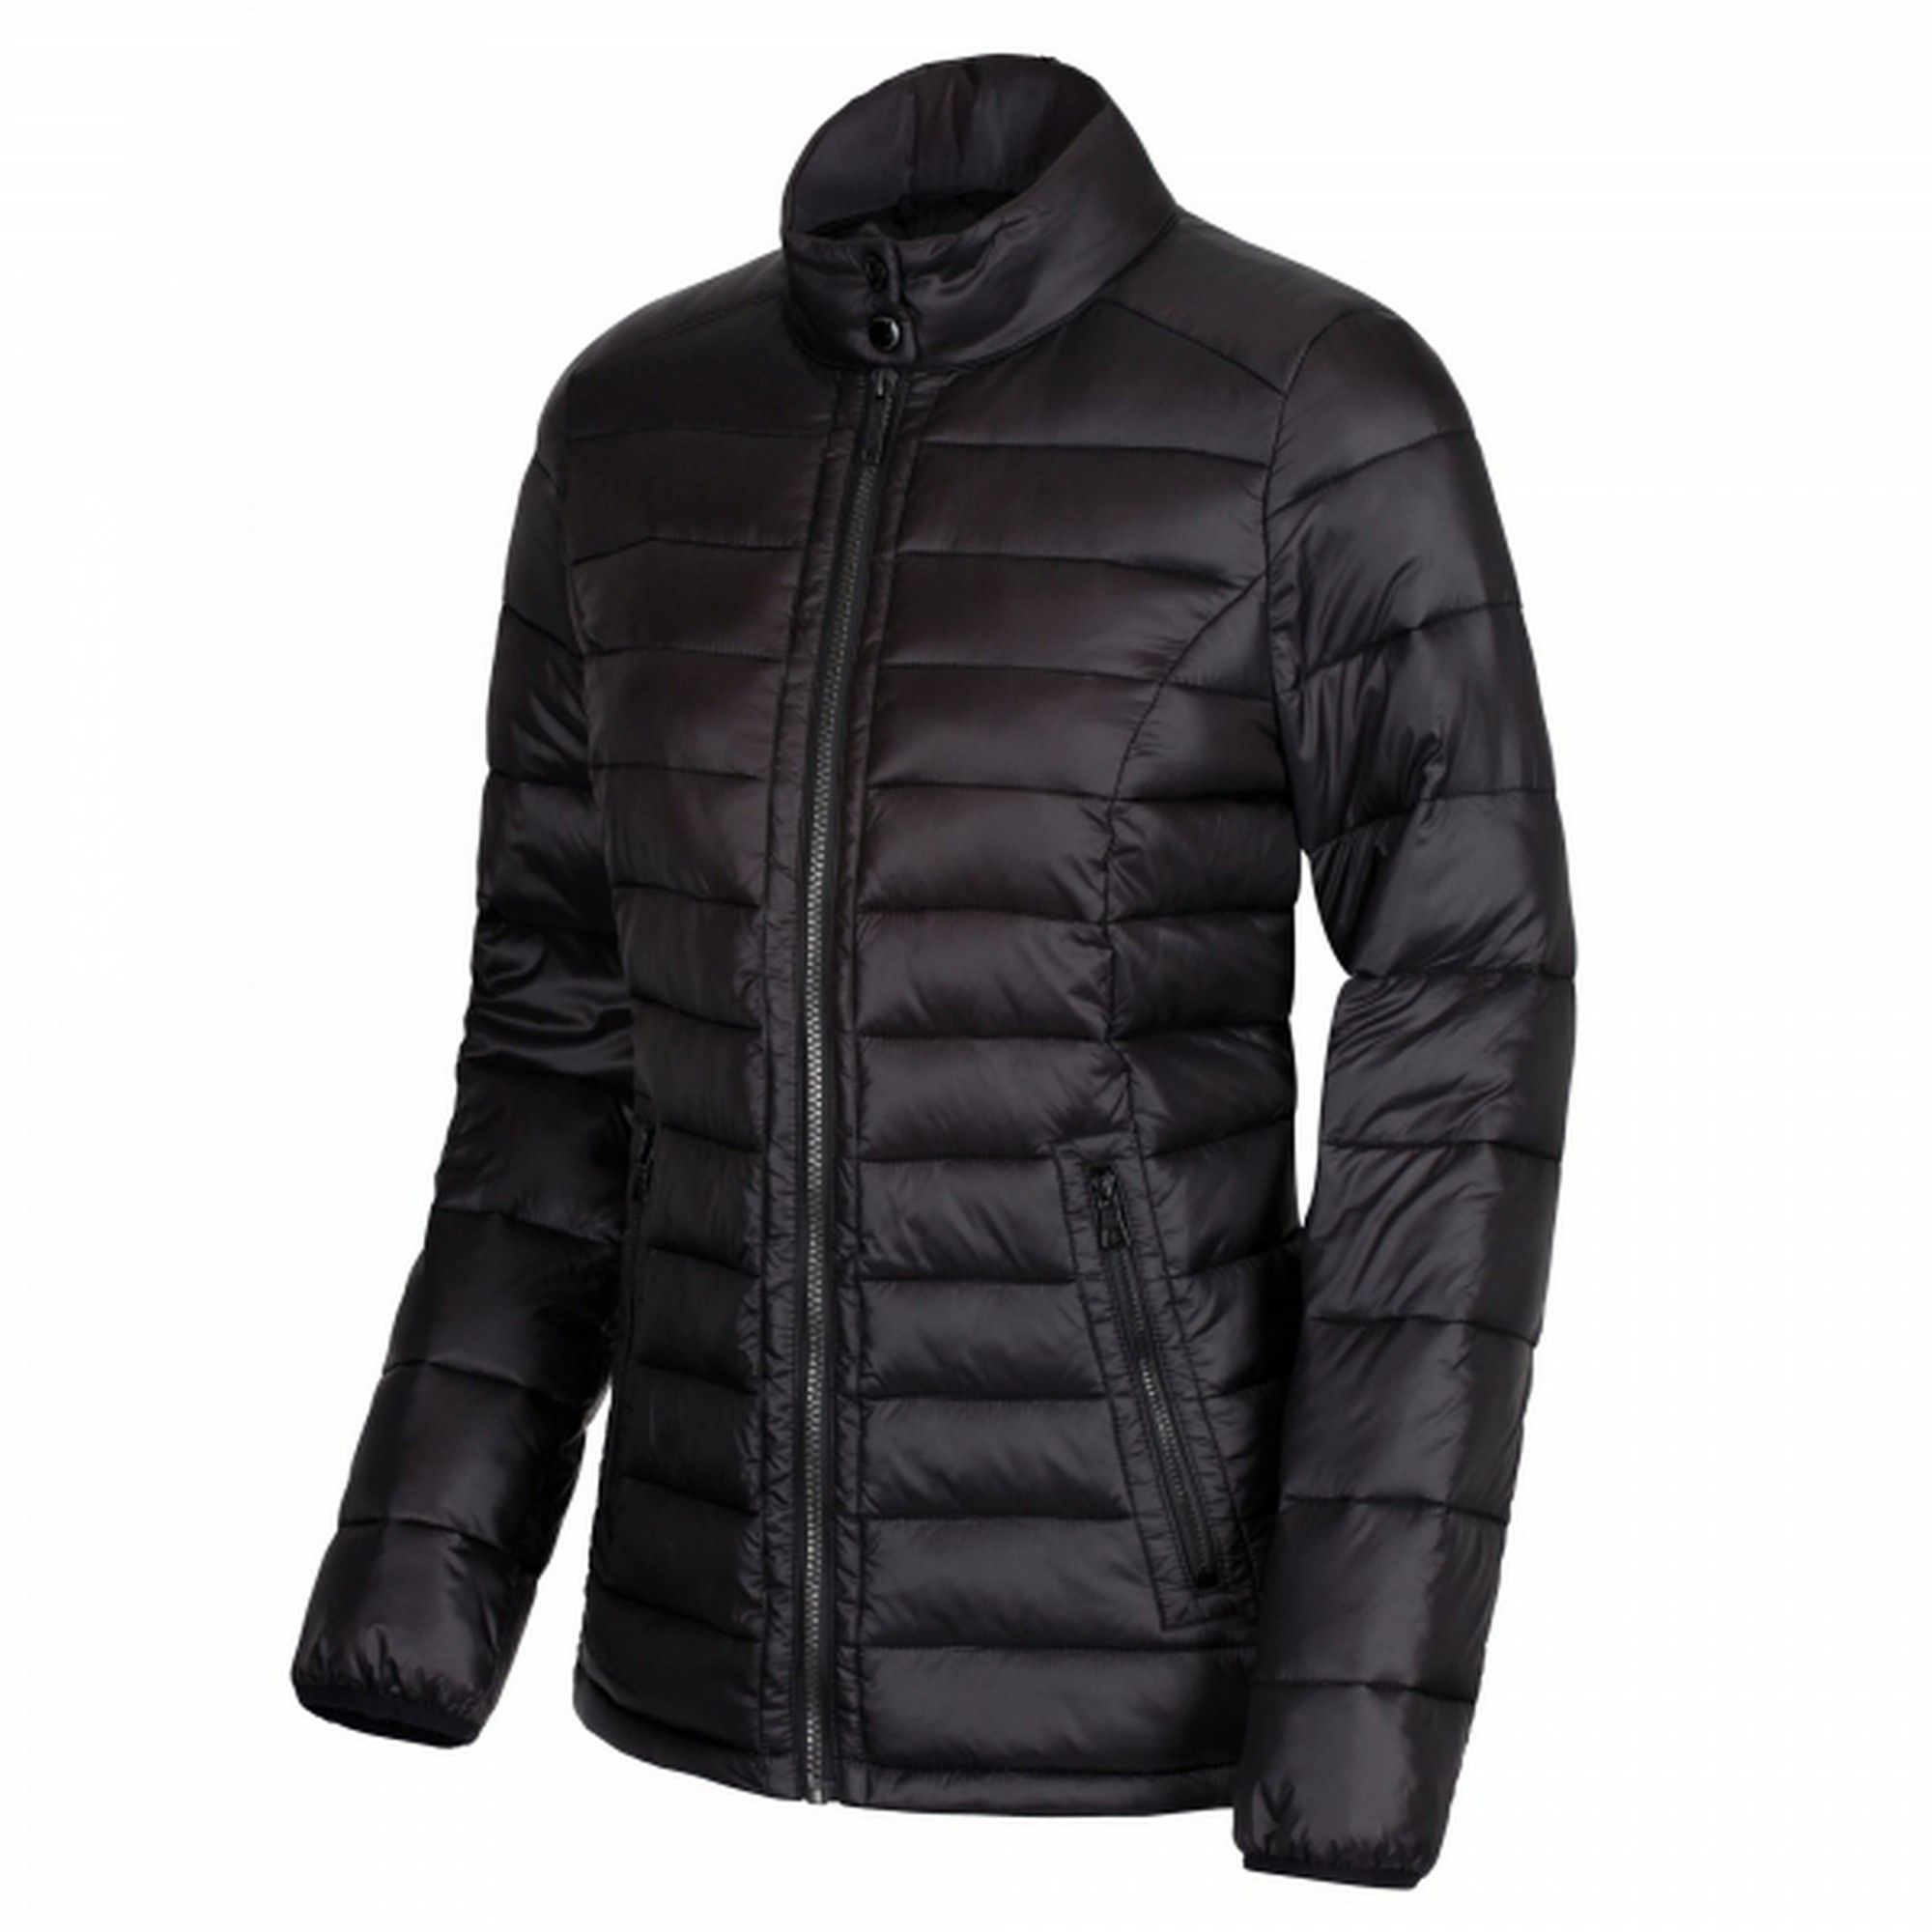 Womens full zip jacket with water repellent and care finish. Thermo-Guard insulation. Polyester taffeta lined. Fashion stand collar with branded snap fastening. 2 zipped lower warm lined pockets. Ideal for wearing outdoors on a cold day. 100% Polyamide.